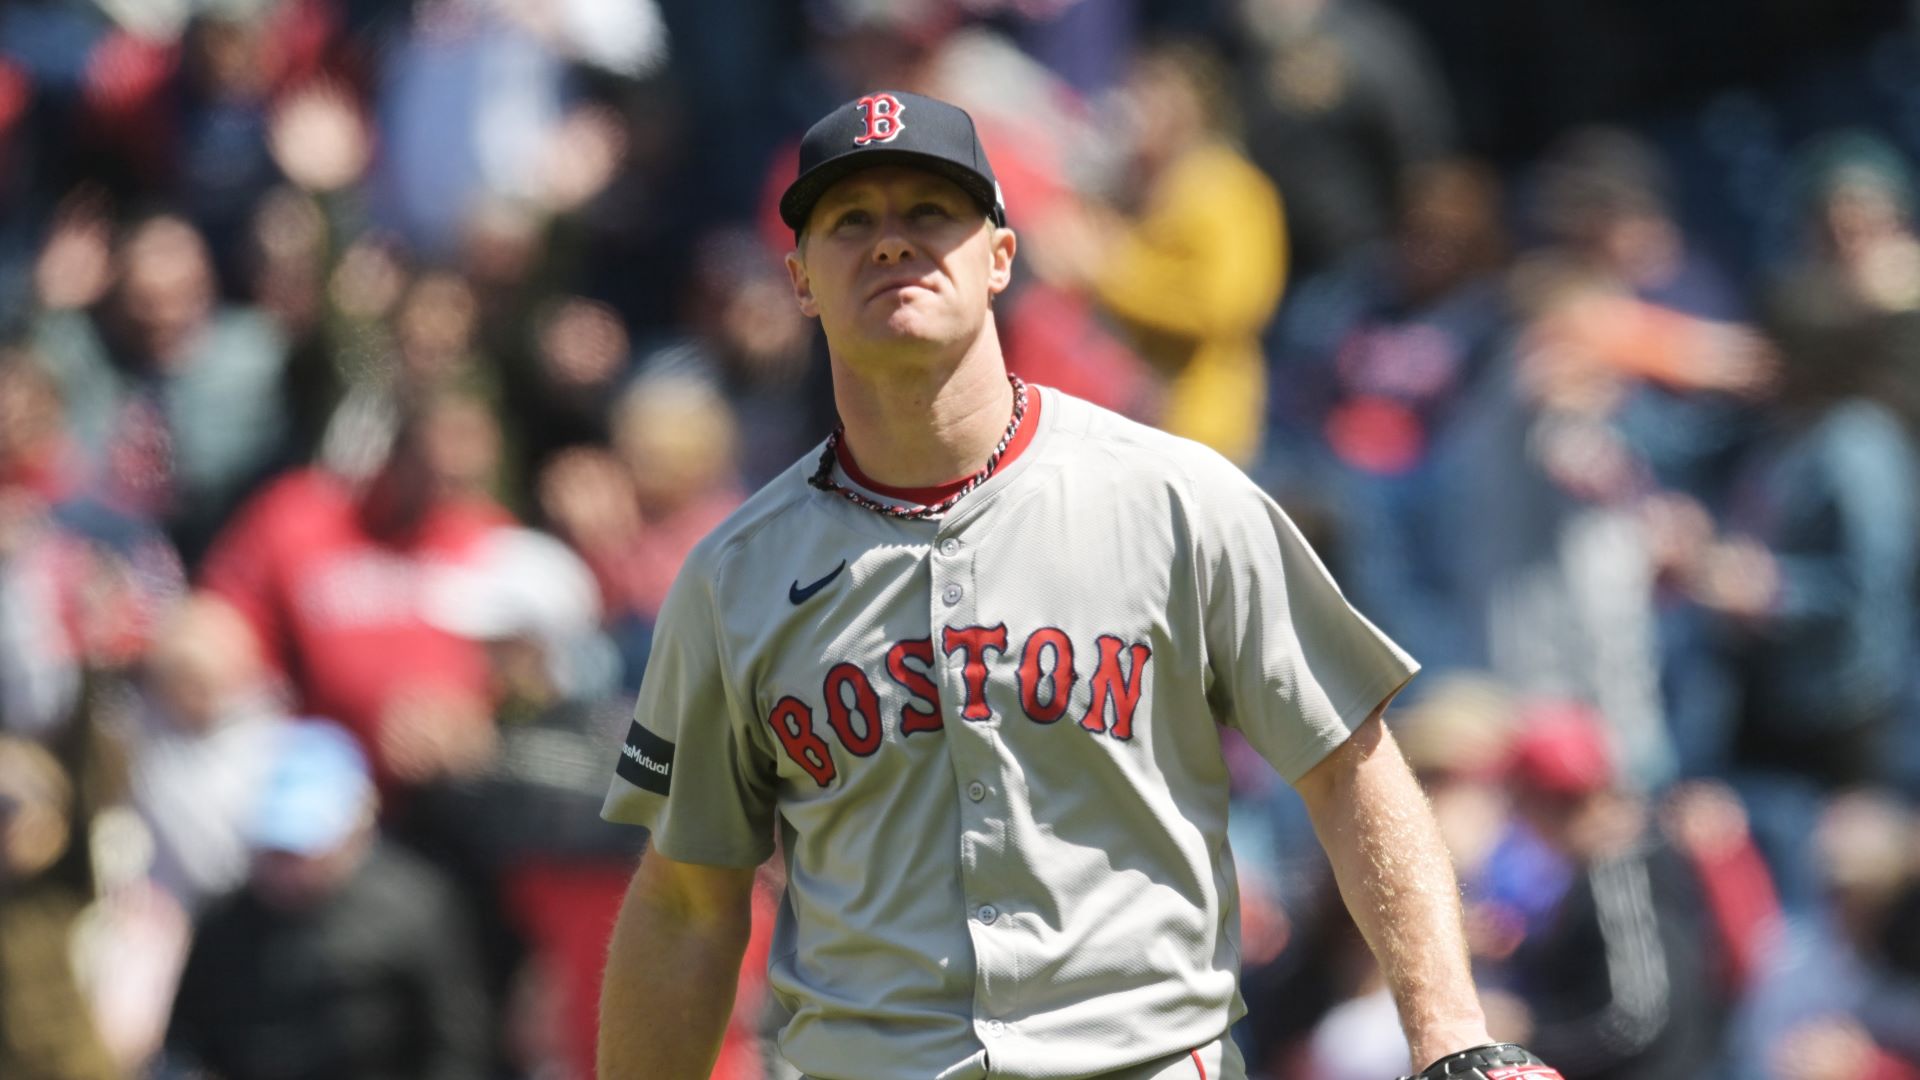 Red Sox Notes: One ‘Bad’ Inning Spoils Chase Anderson’s Spot
Start